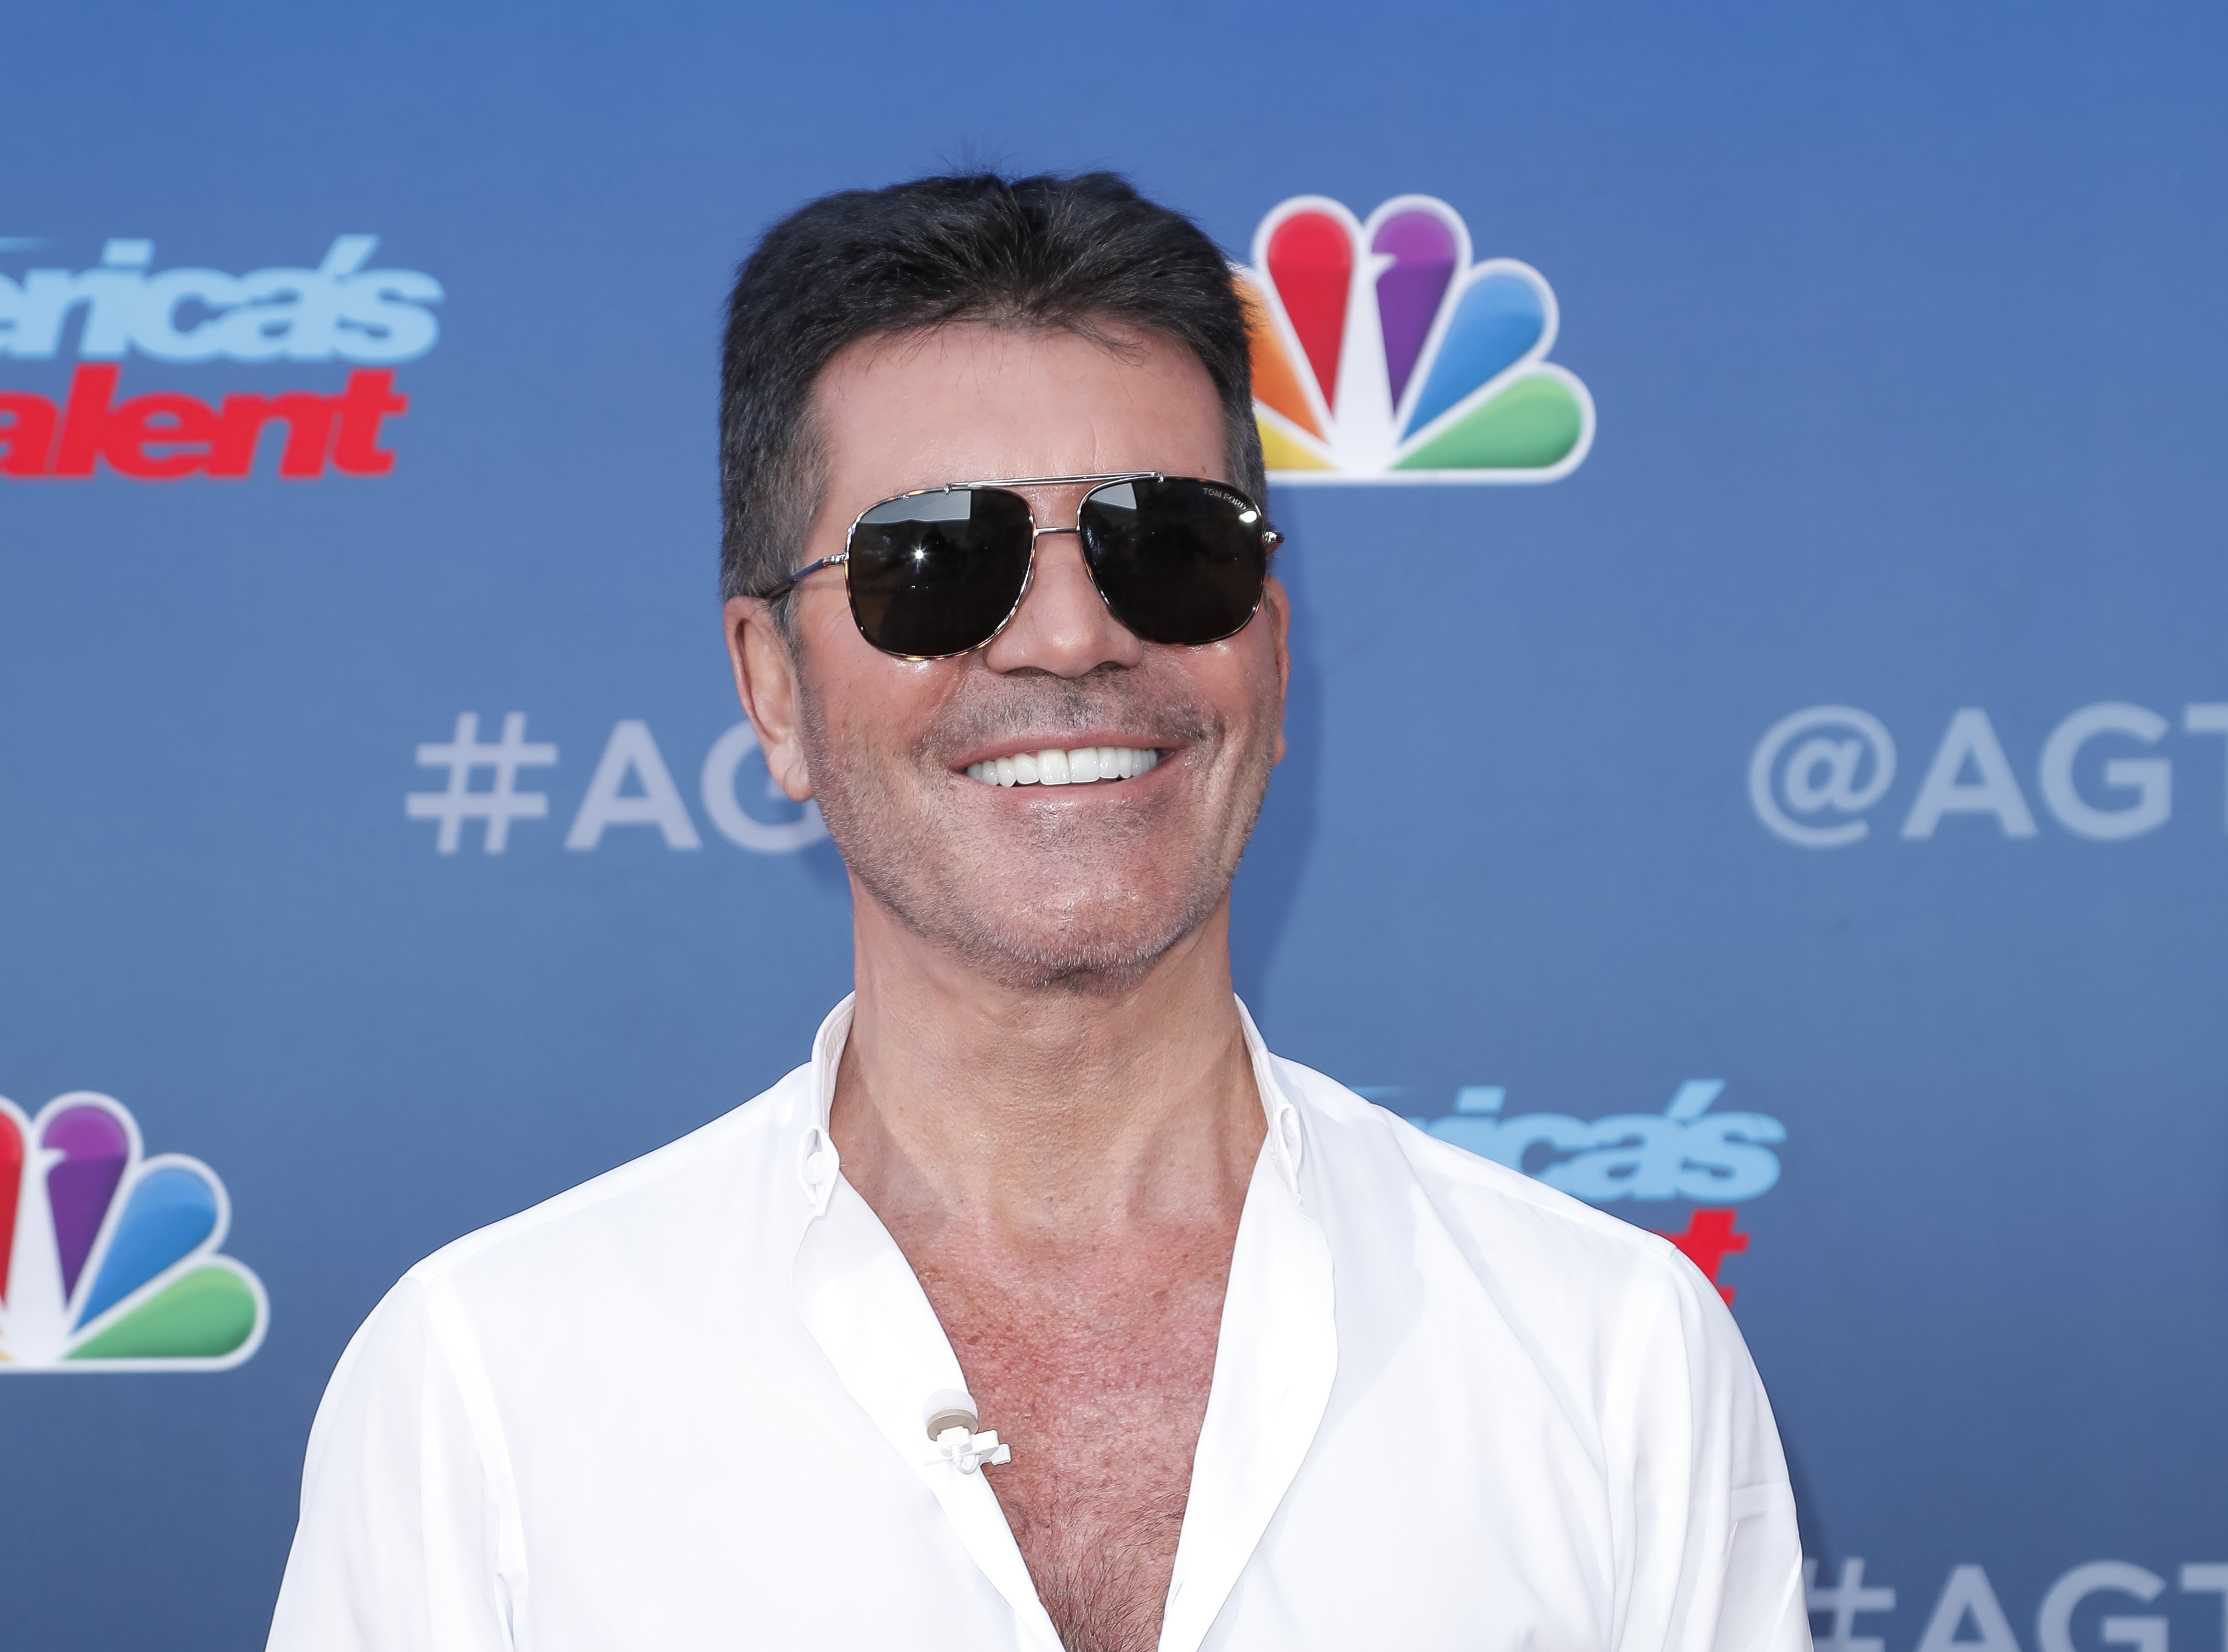 Simon Cowell attends the season 15 kickoff for "America's Got Talent" in Pasadena, California on March 4, 2020 | Photo: Getty Images